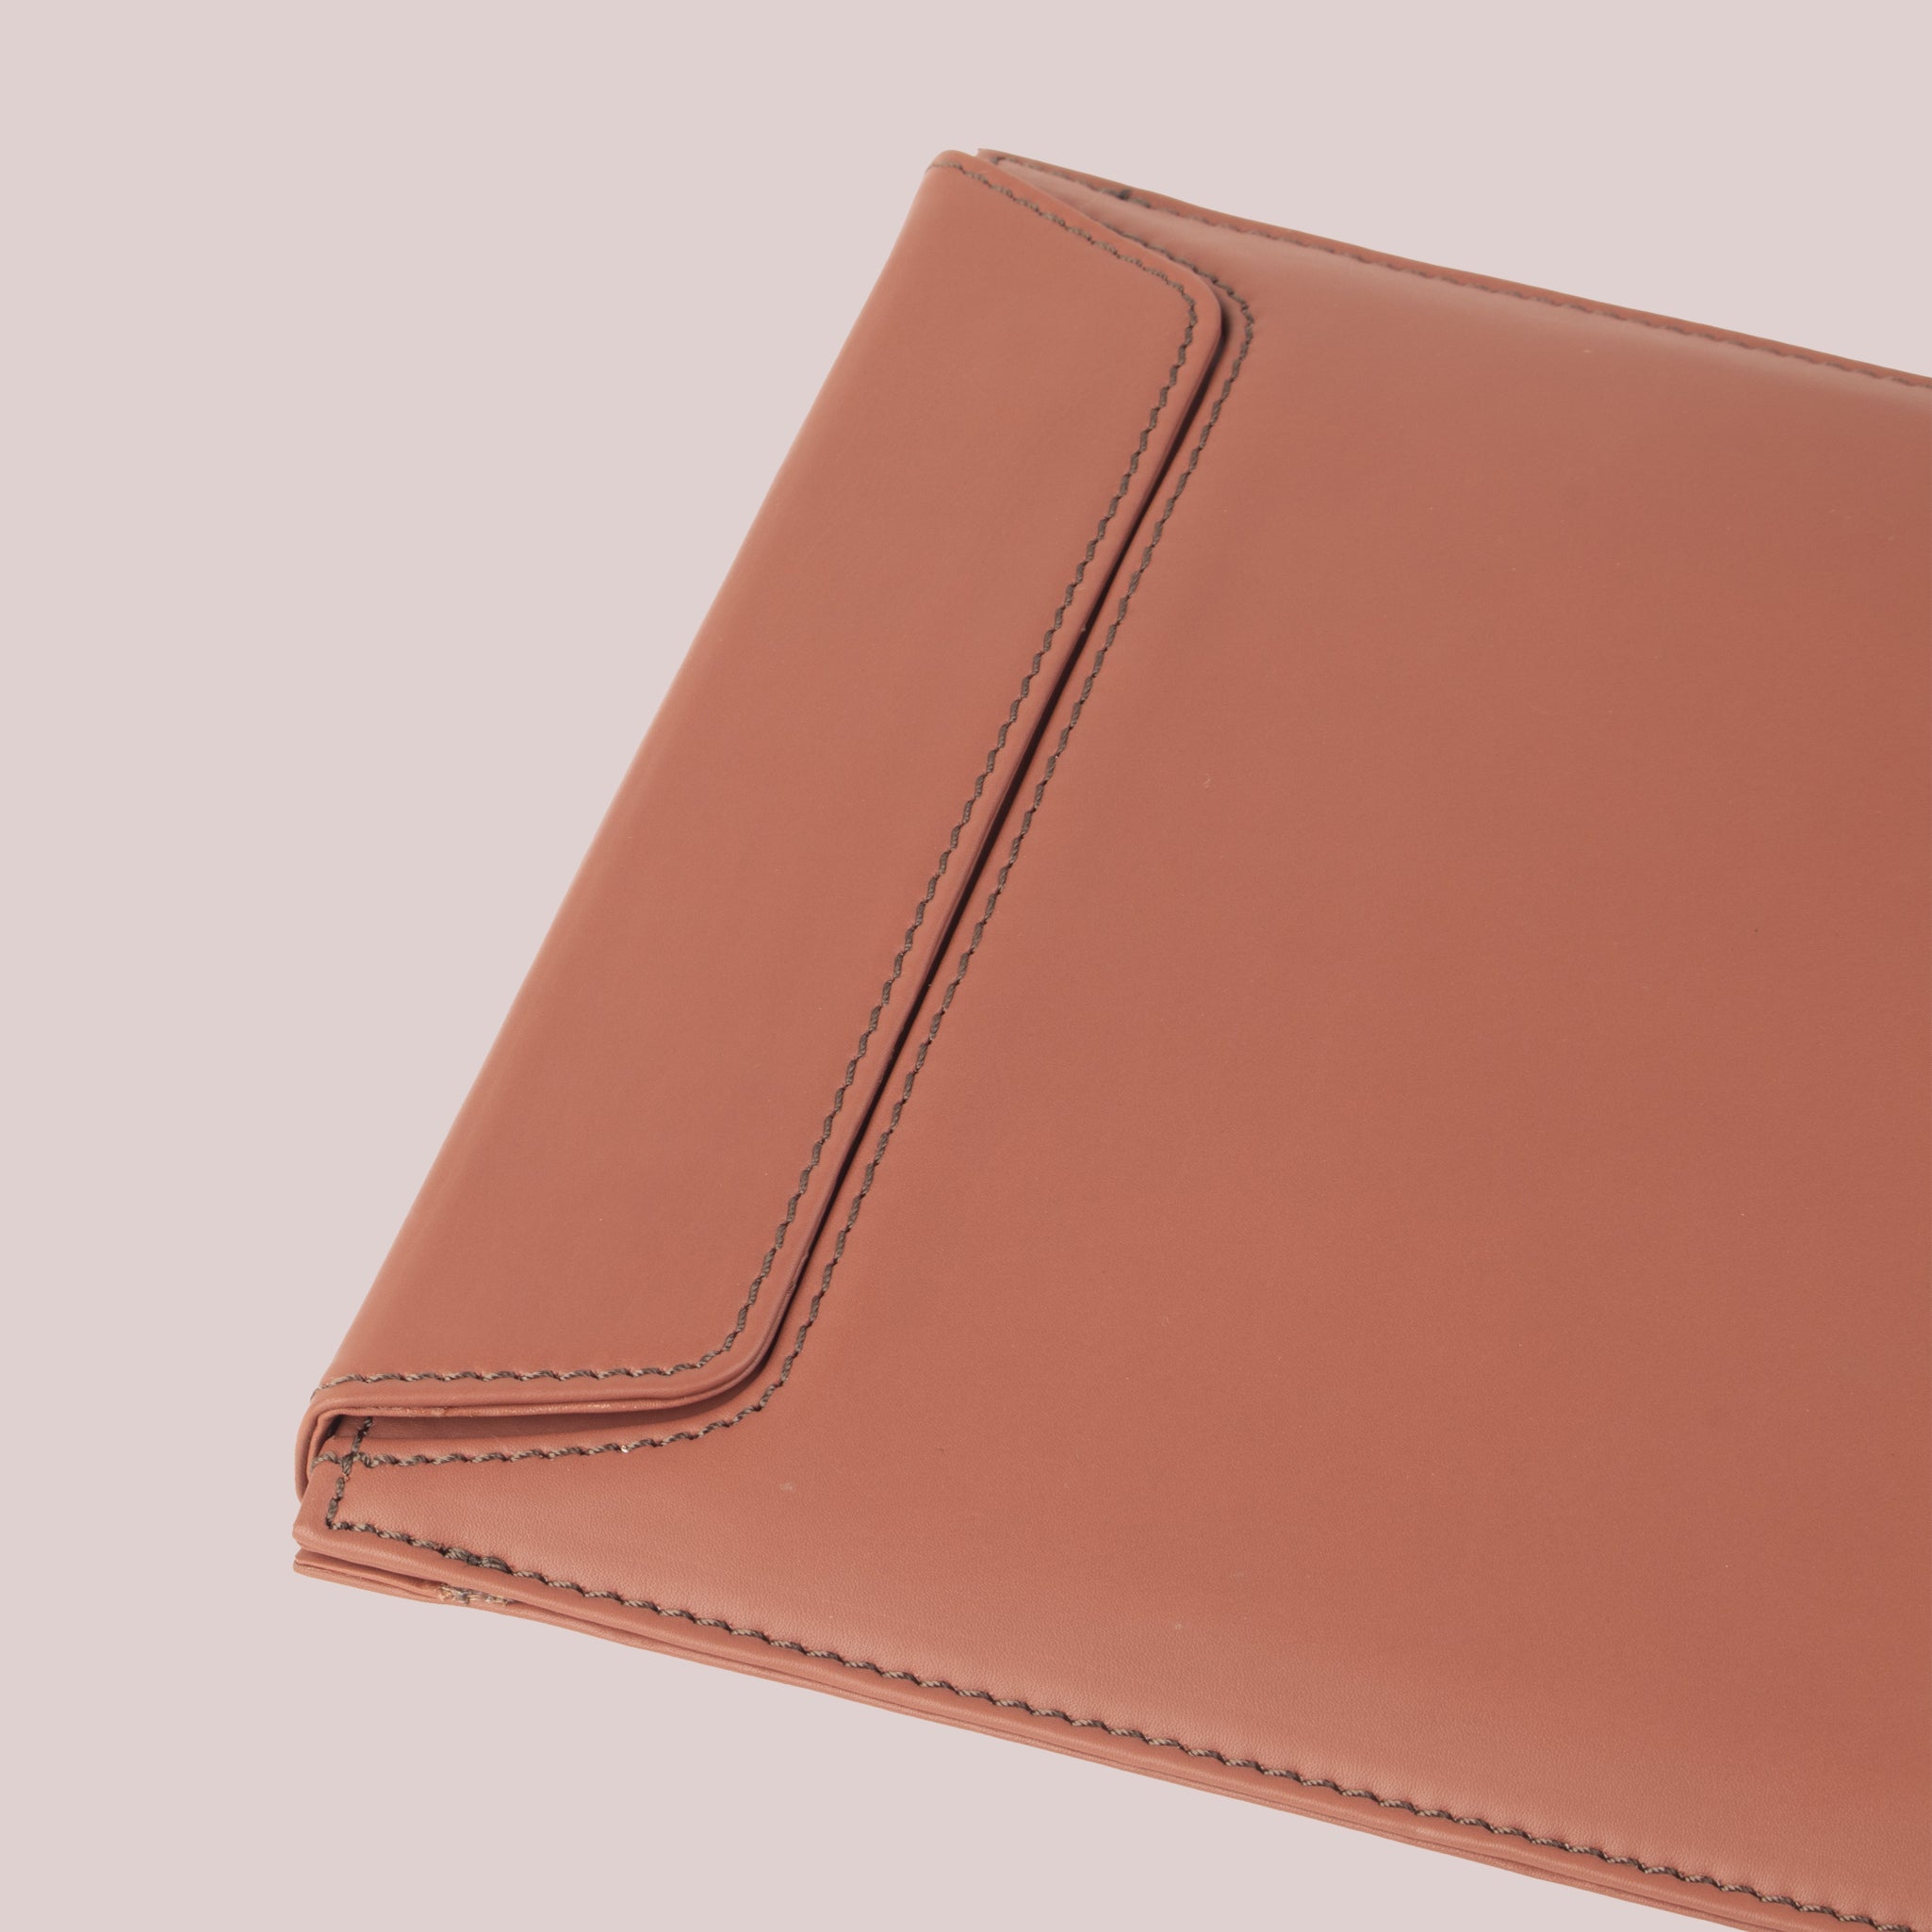 Shop Brown MacBook Pro 13 Note Sleeves at the best price